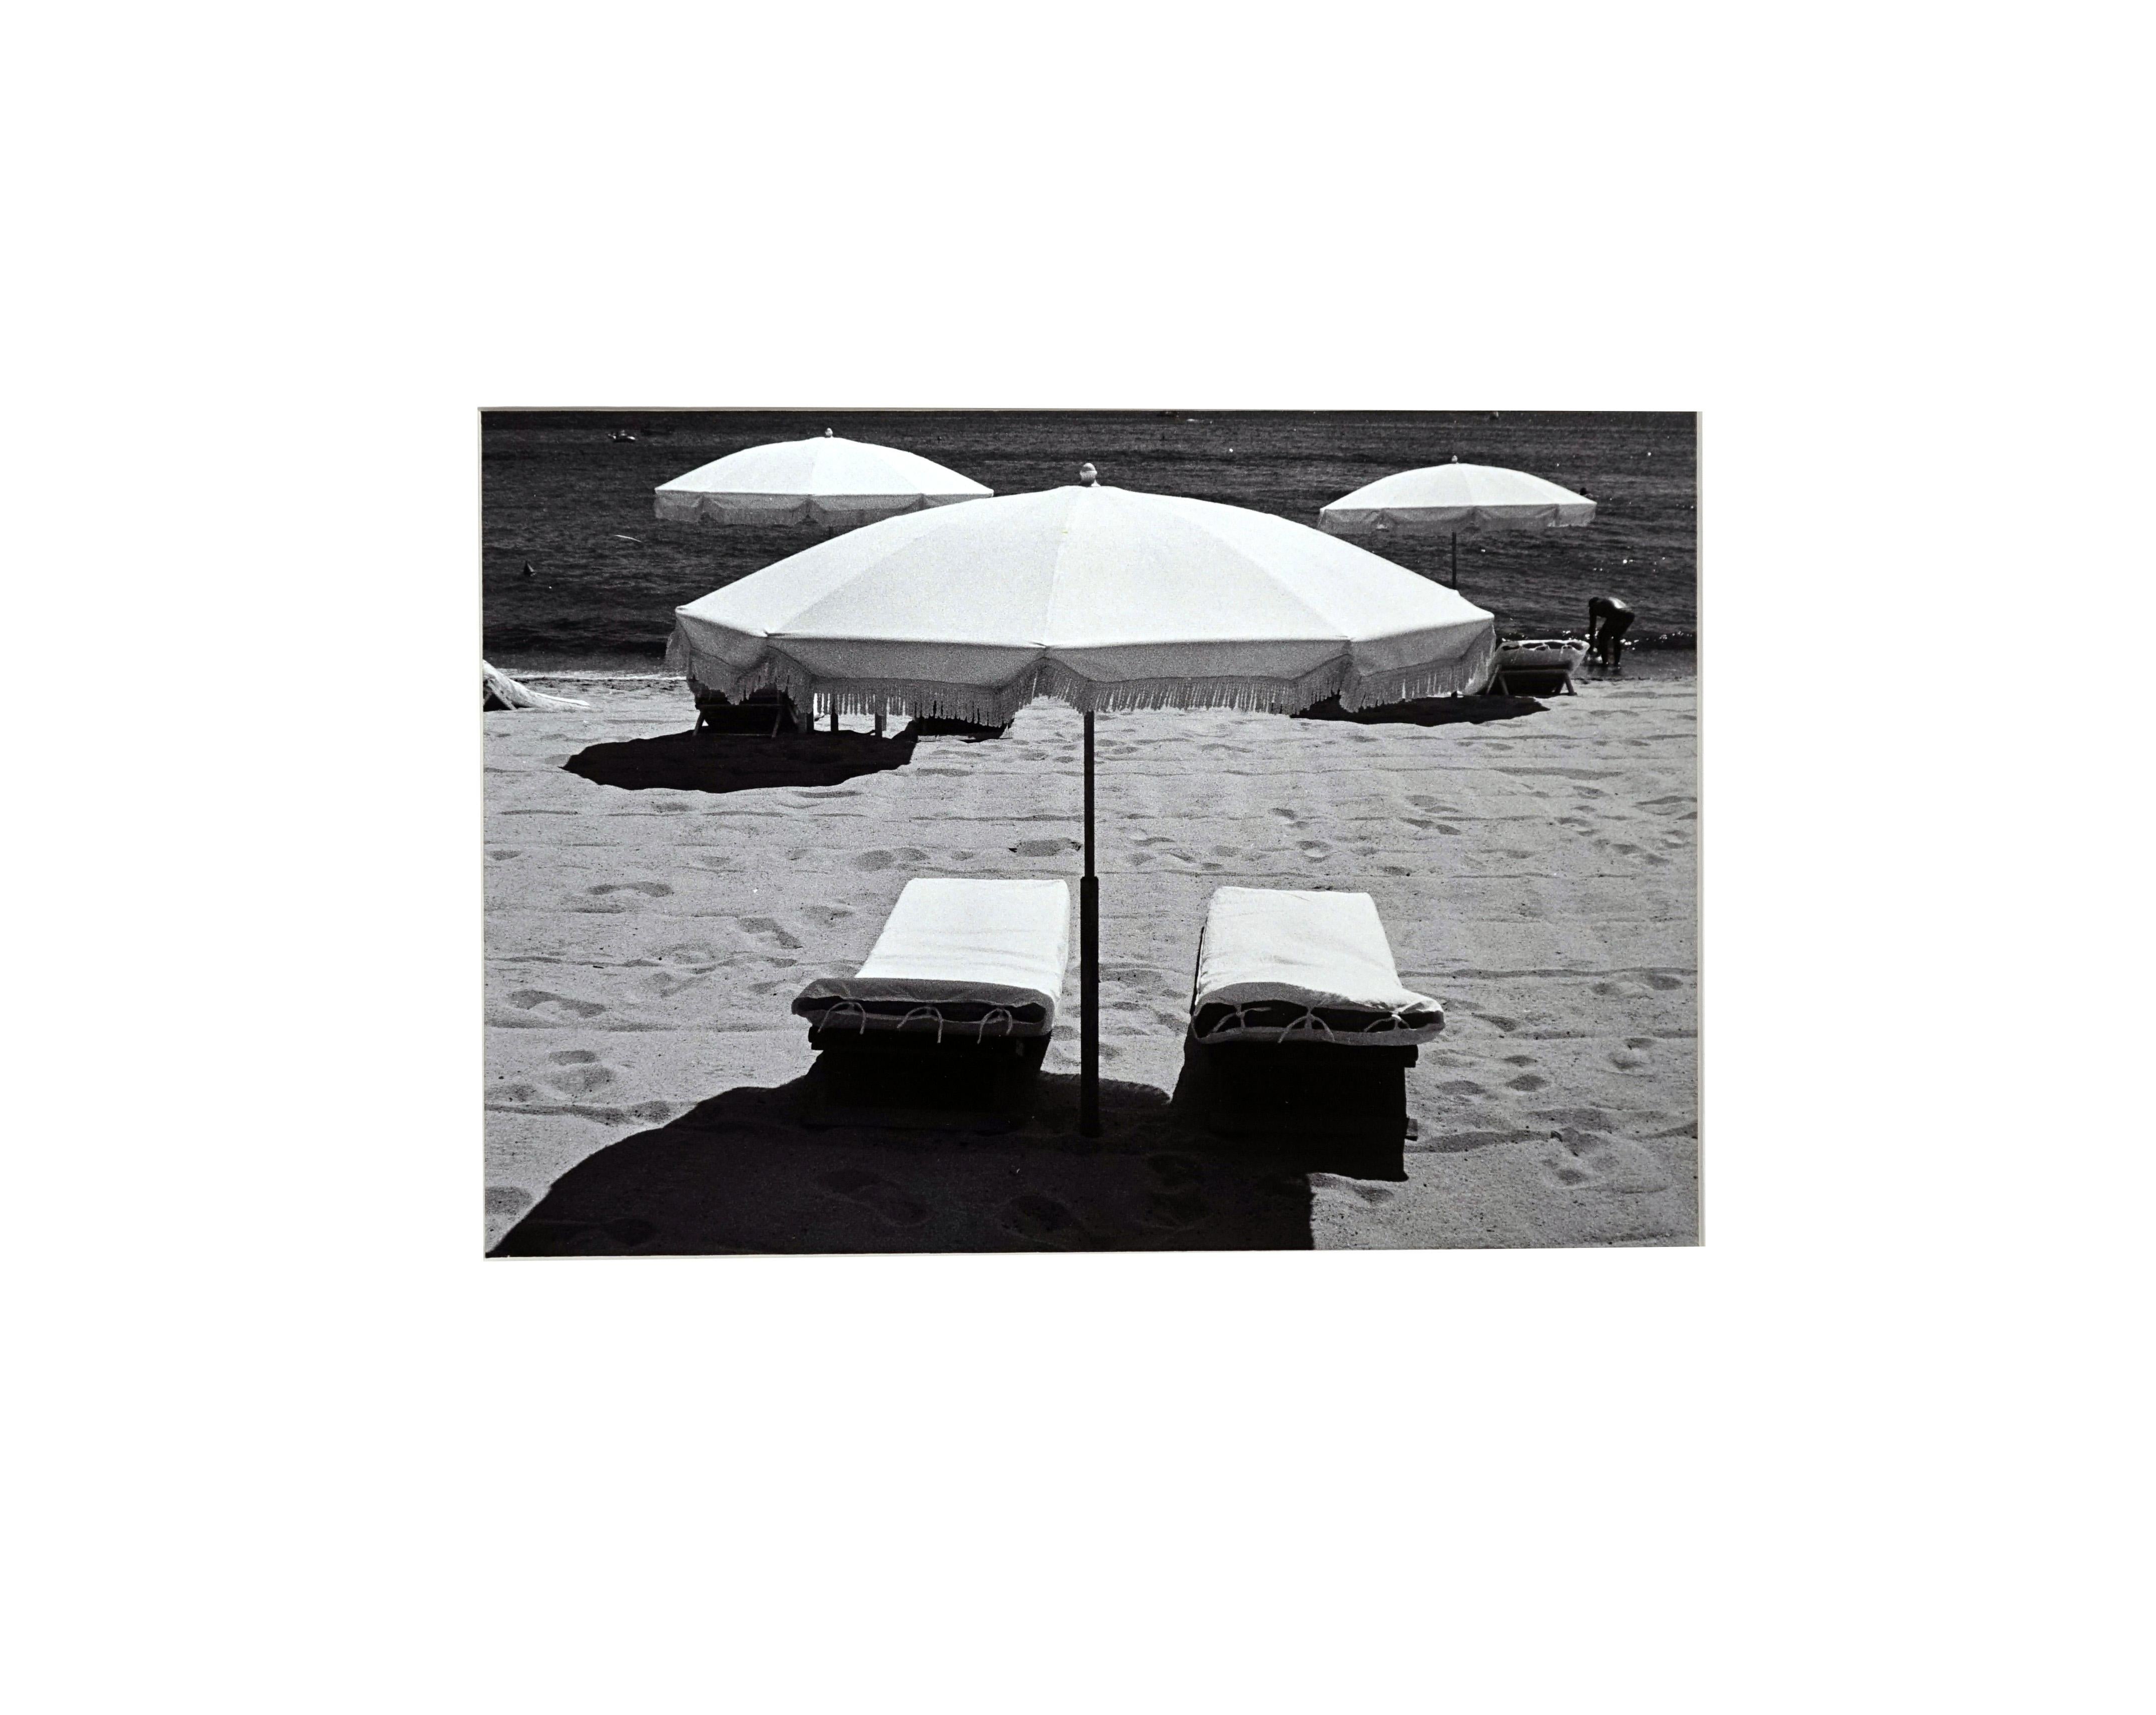 Artwork sold in perfect condition - Off-Print # 1 (Saint Tropez 1978) from the portfolio Lines (Coffret Prestige # 2)
This is a Minimalist framing & presentation of the artwork :
The Fine Art print on Baryta paper is mounted on a 2mm dibond plate